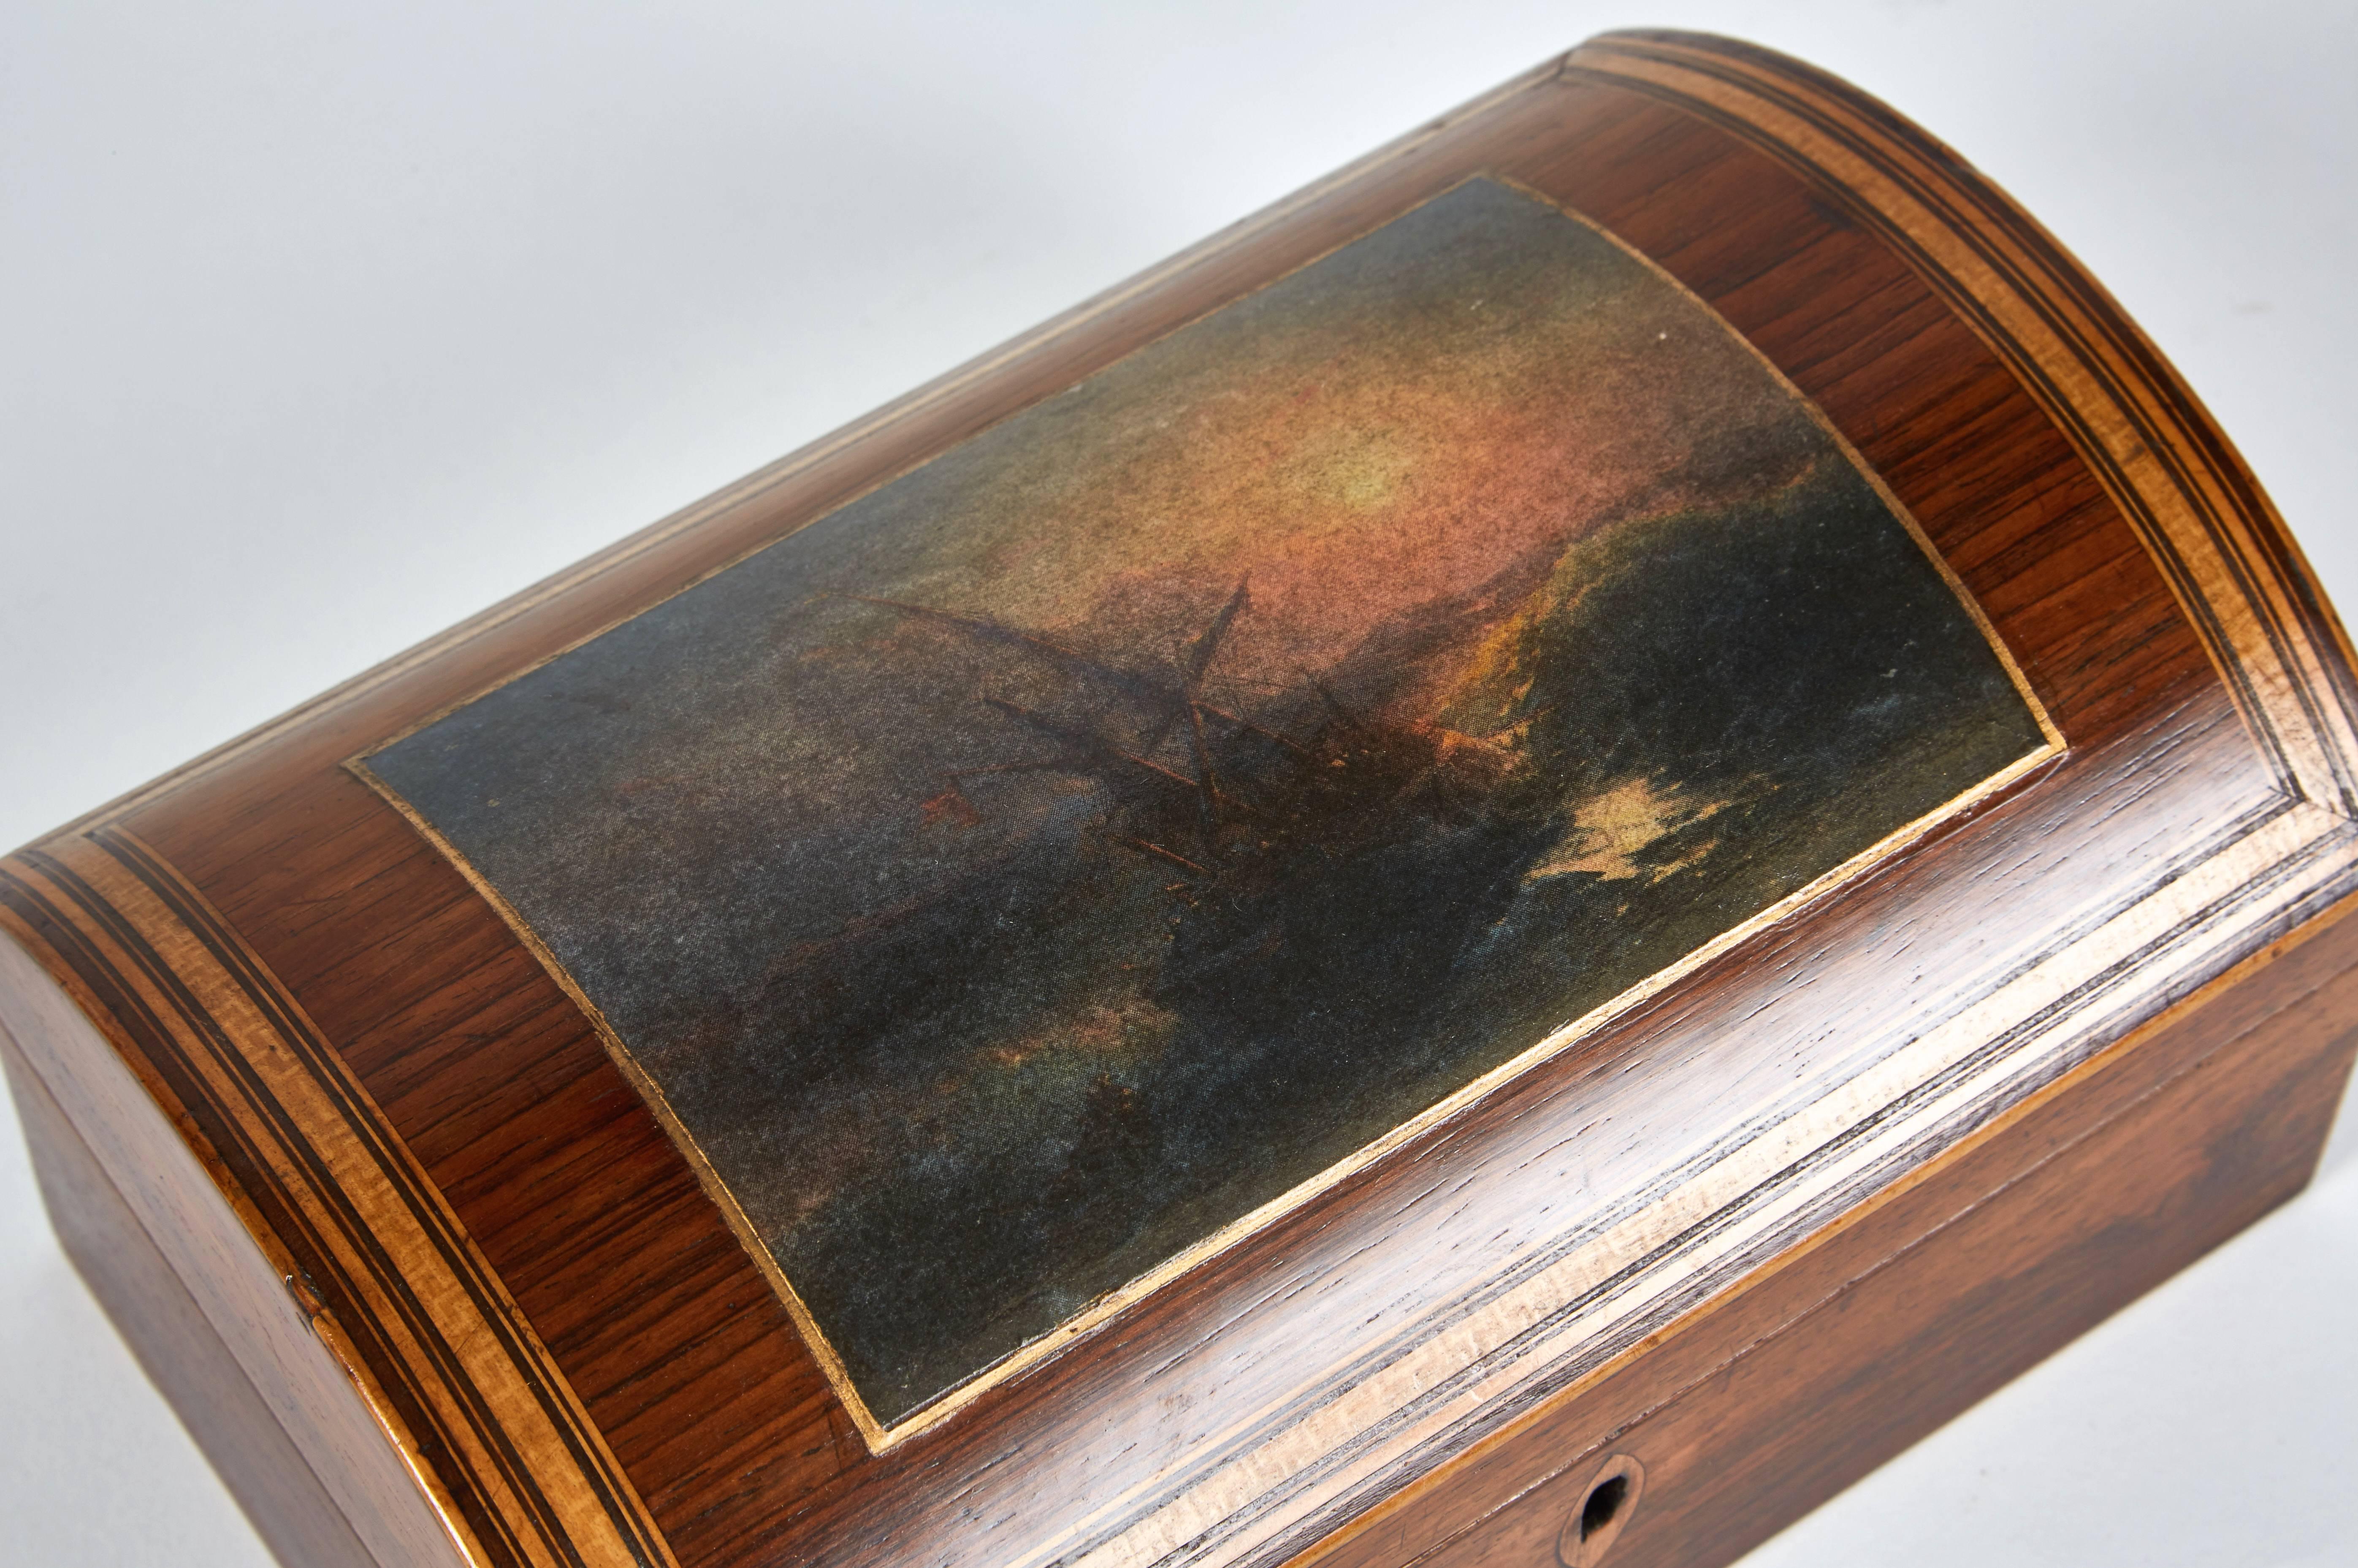 Wooden dome box with seascape scene from 1880s England. 